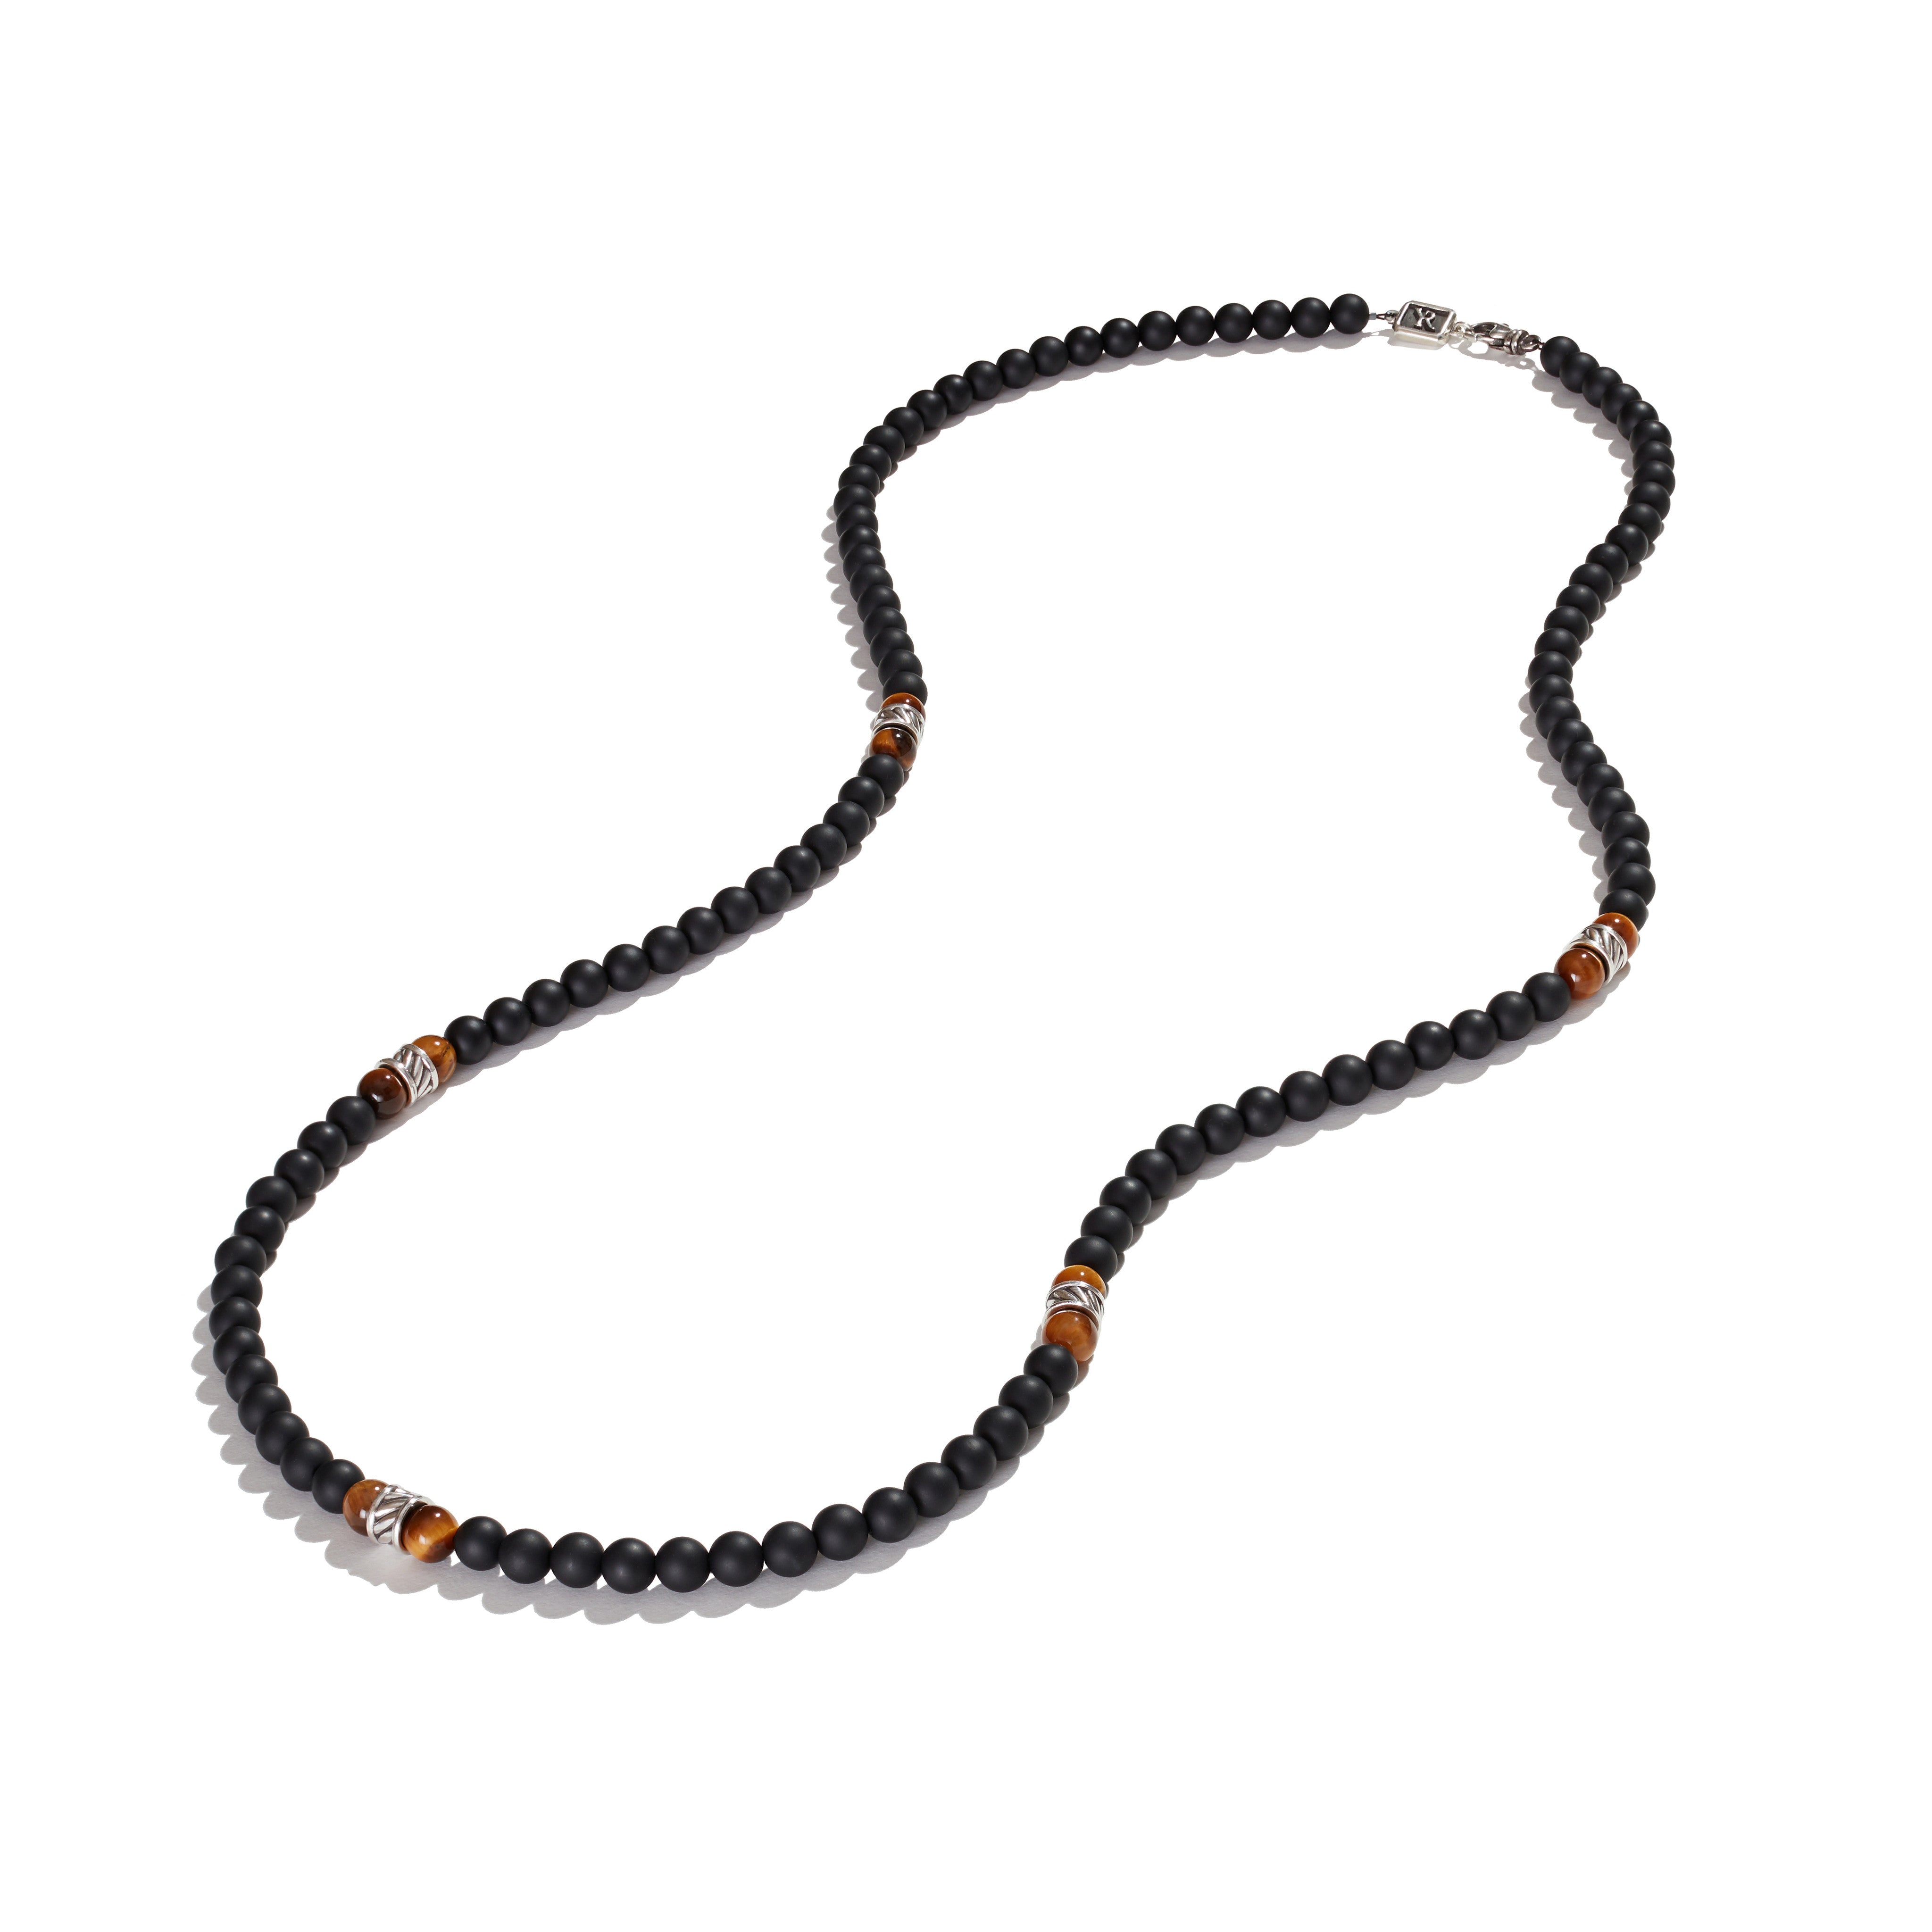 Spiritual Necklace with Forza, Yellow Tiger's Eye and Black Onyx